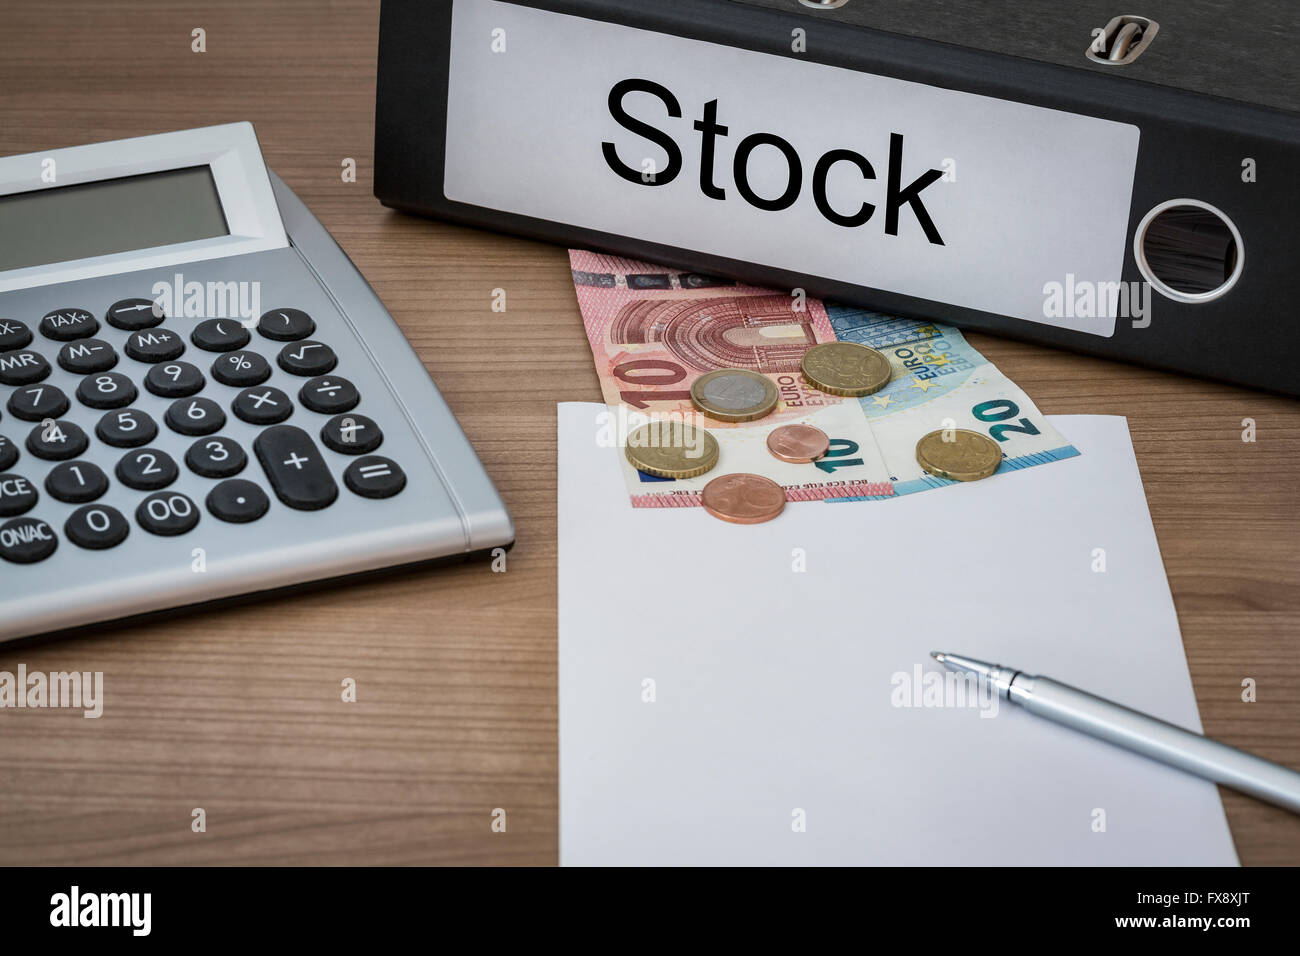 Stock written on a binder on a desk with euro money calculator blank sheet and pen Stock Photo